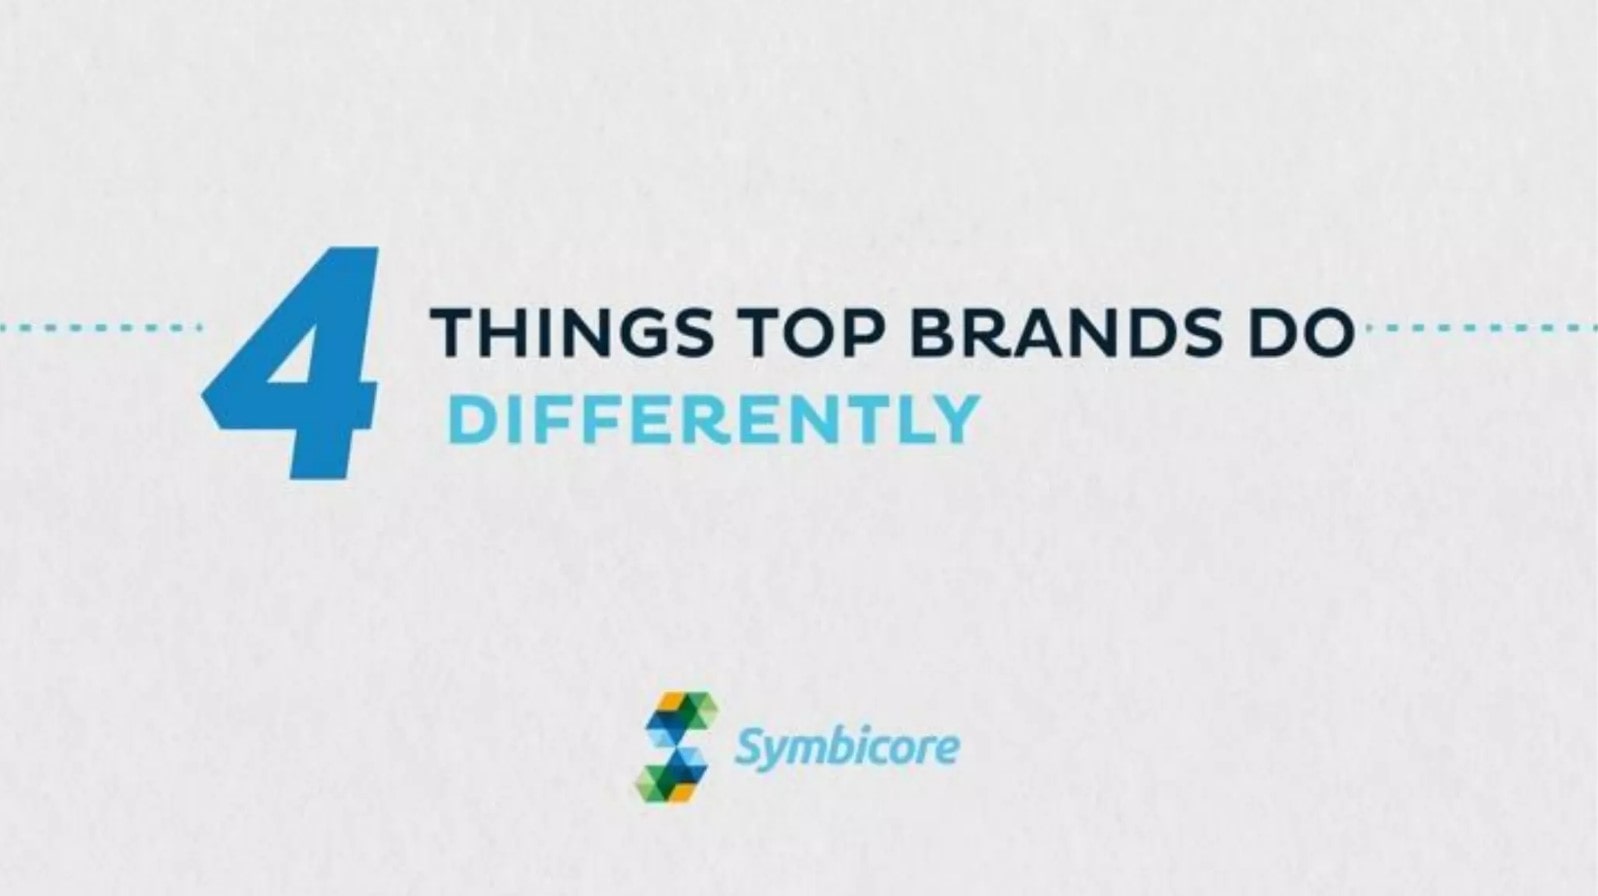 4-things-top-brands-do-differently_1-min